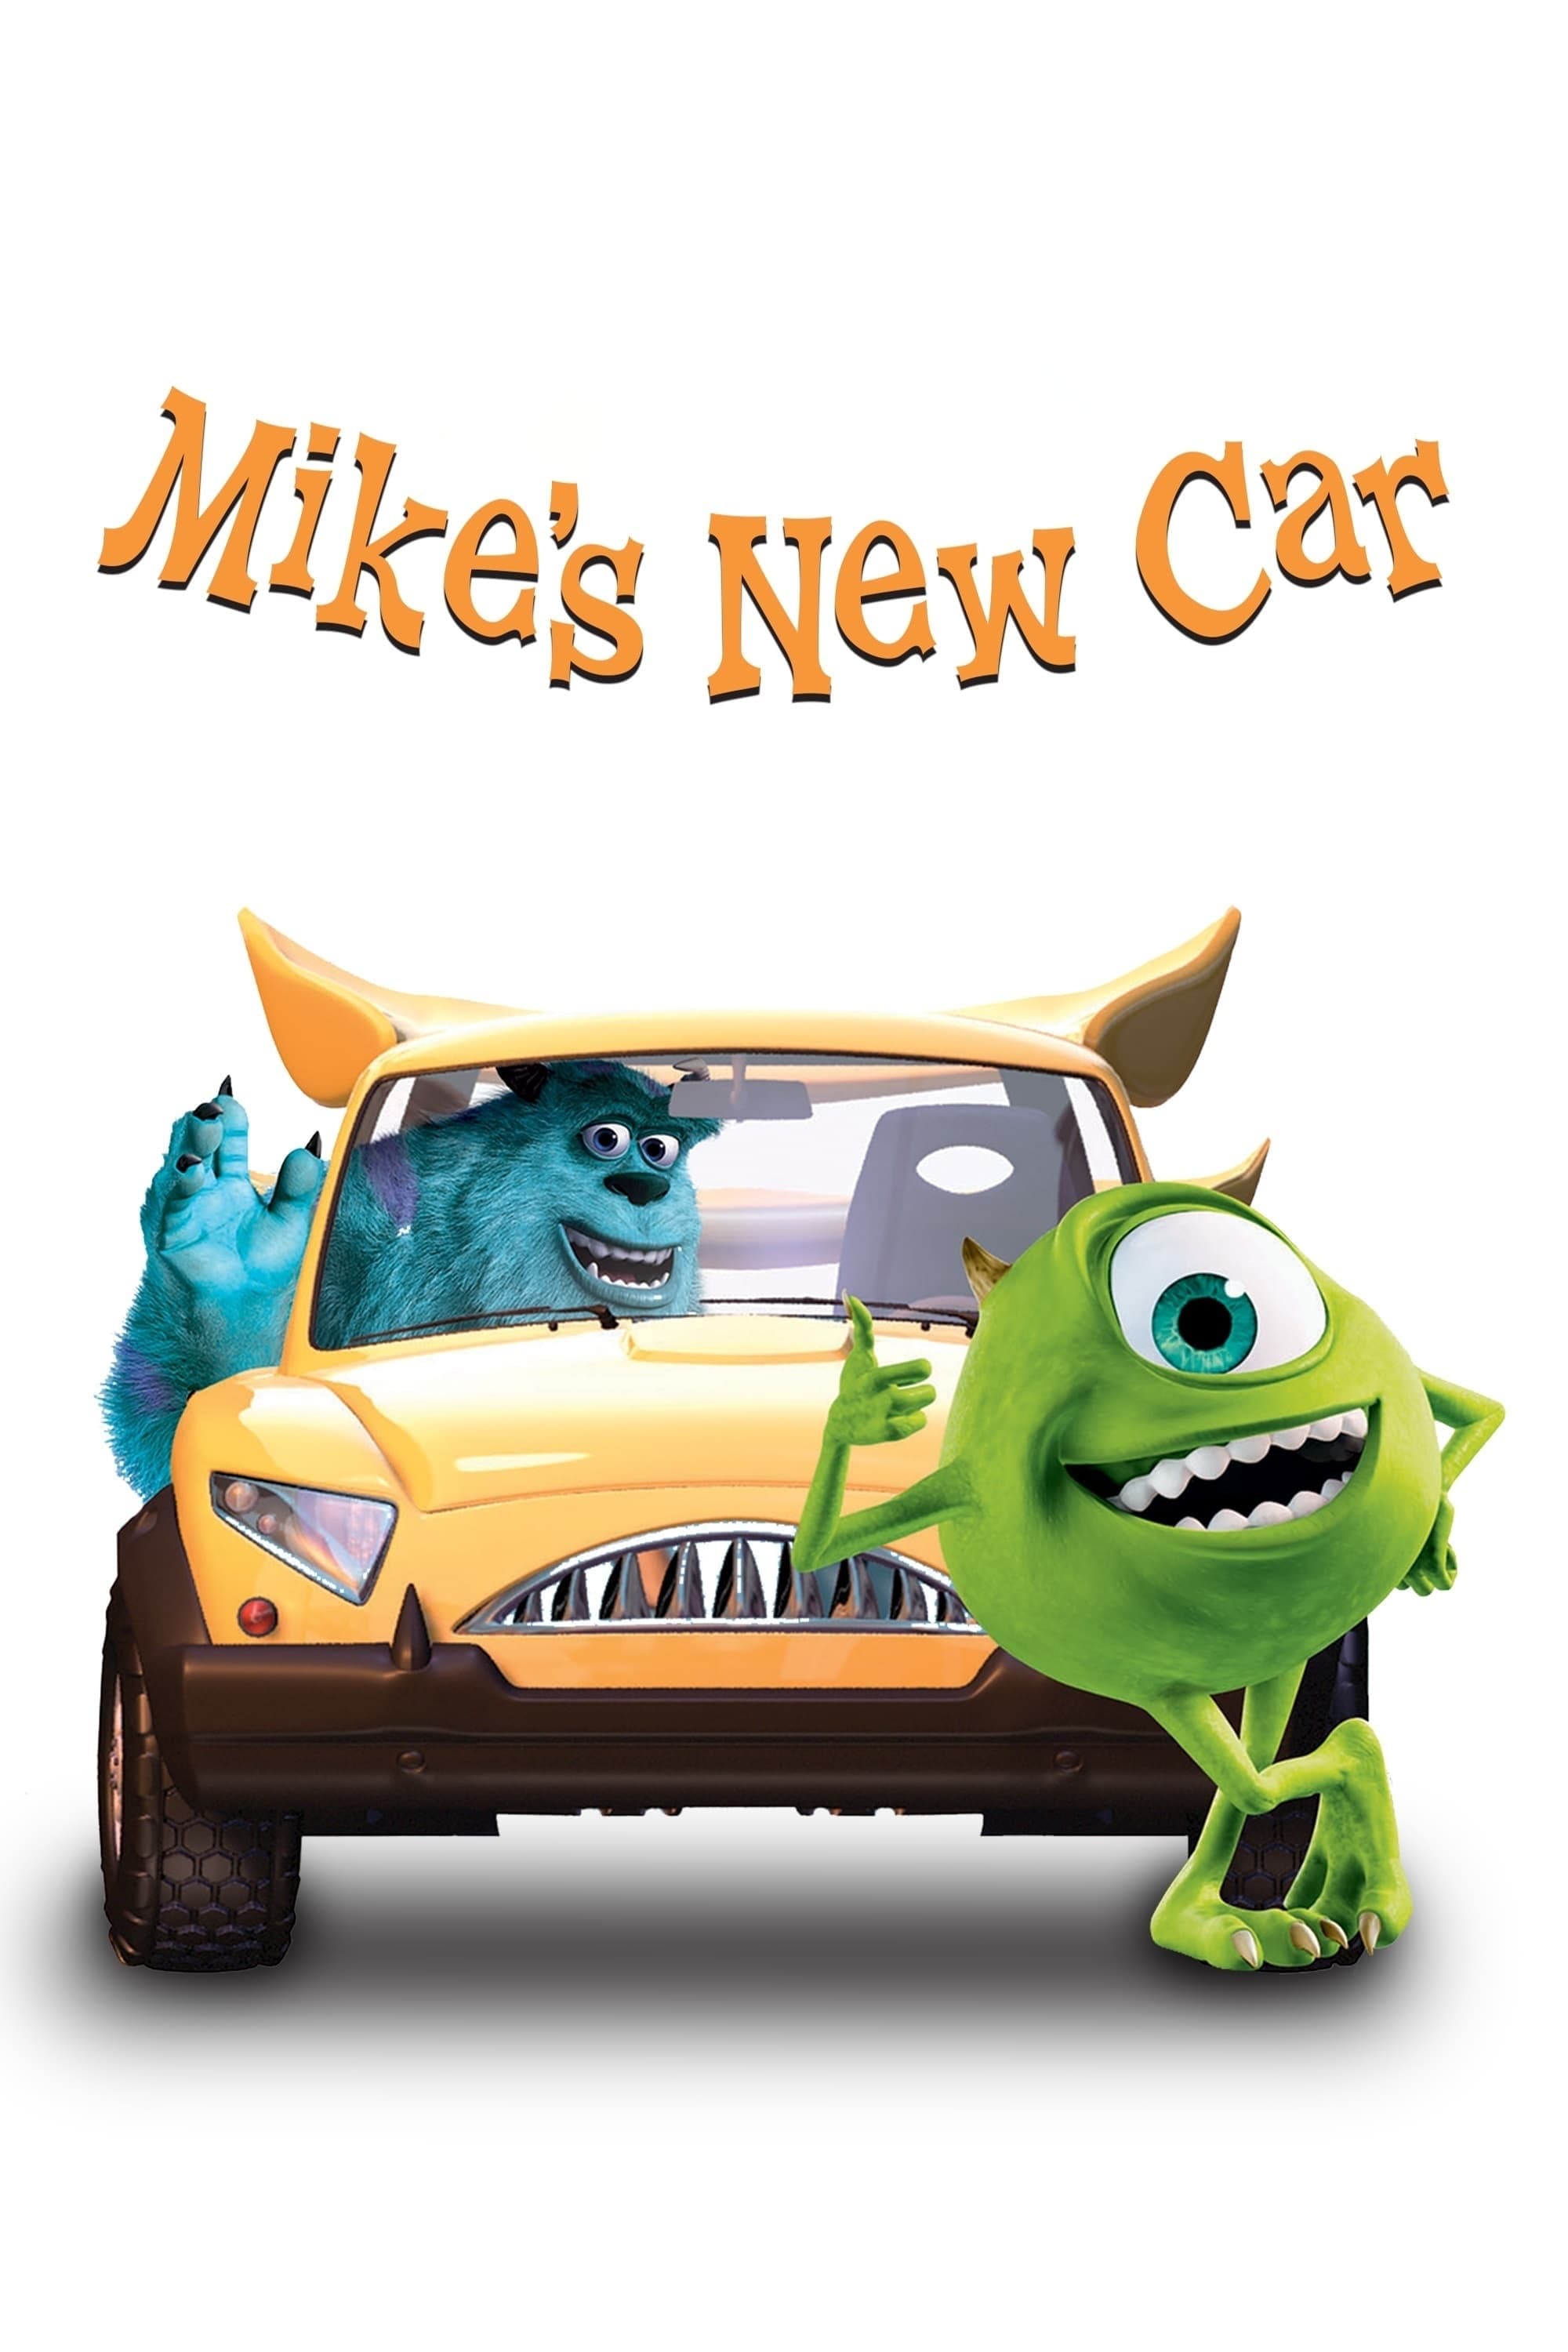 Mike's New Car (2002)